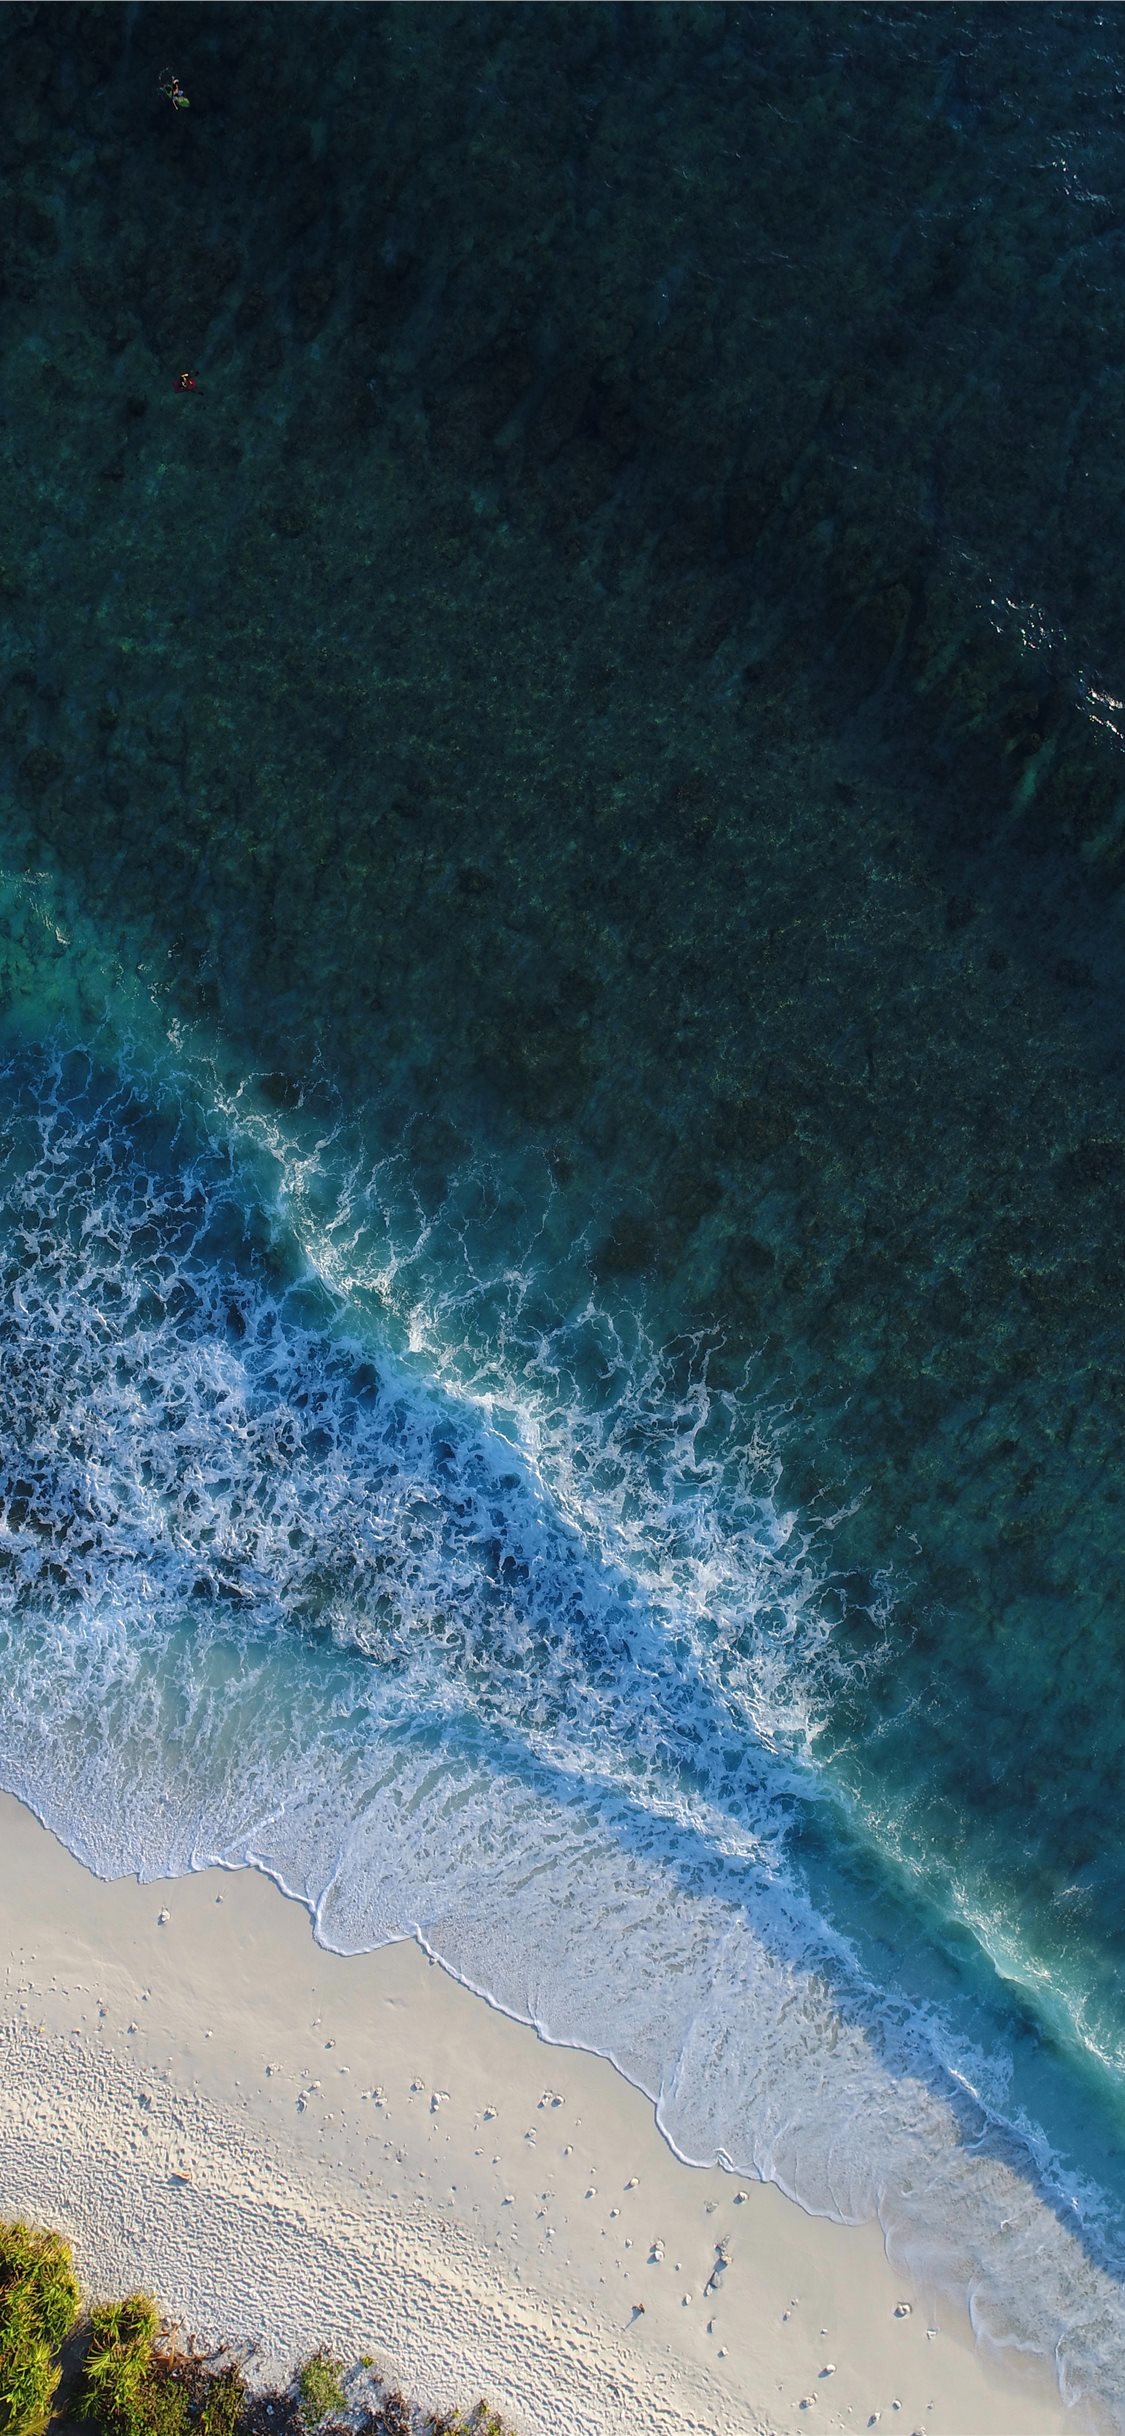 turquoise calm sea wave splashing on white sand be. iPhone X Wallpaper Free Download